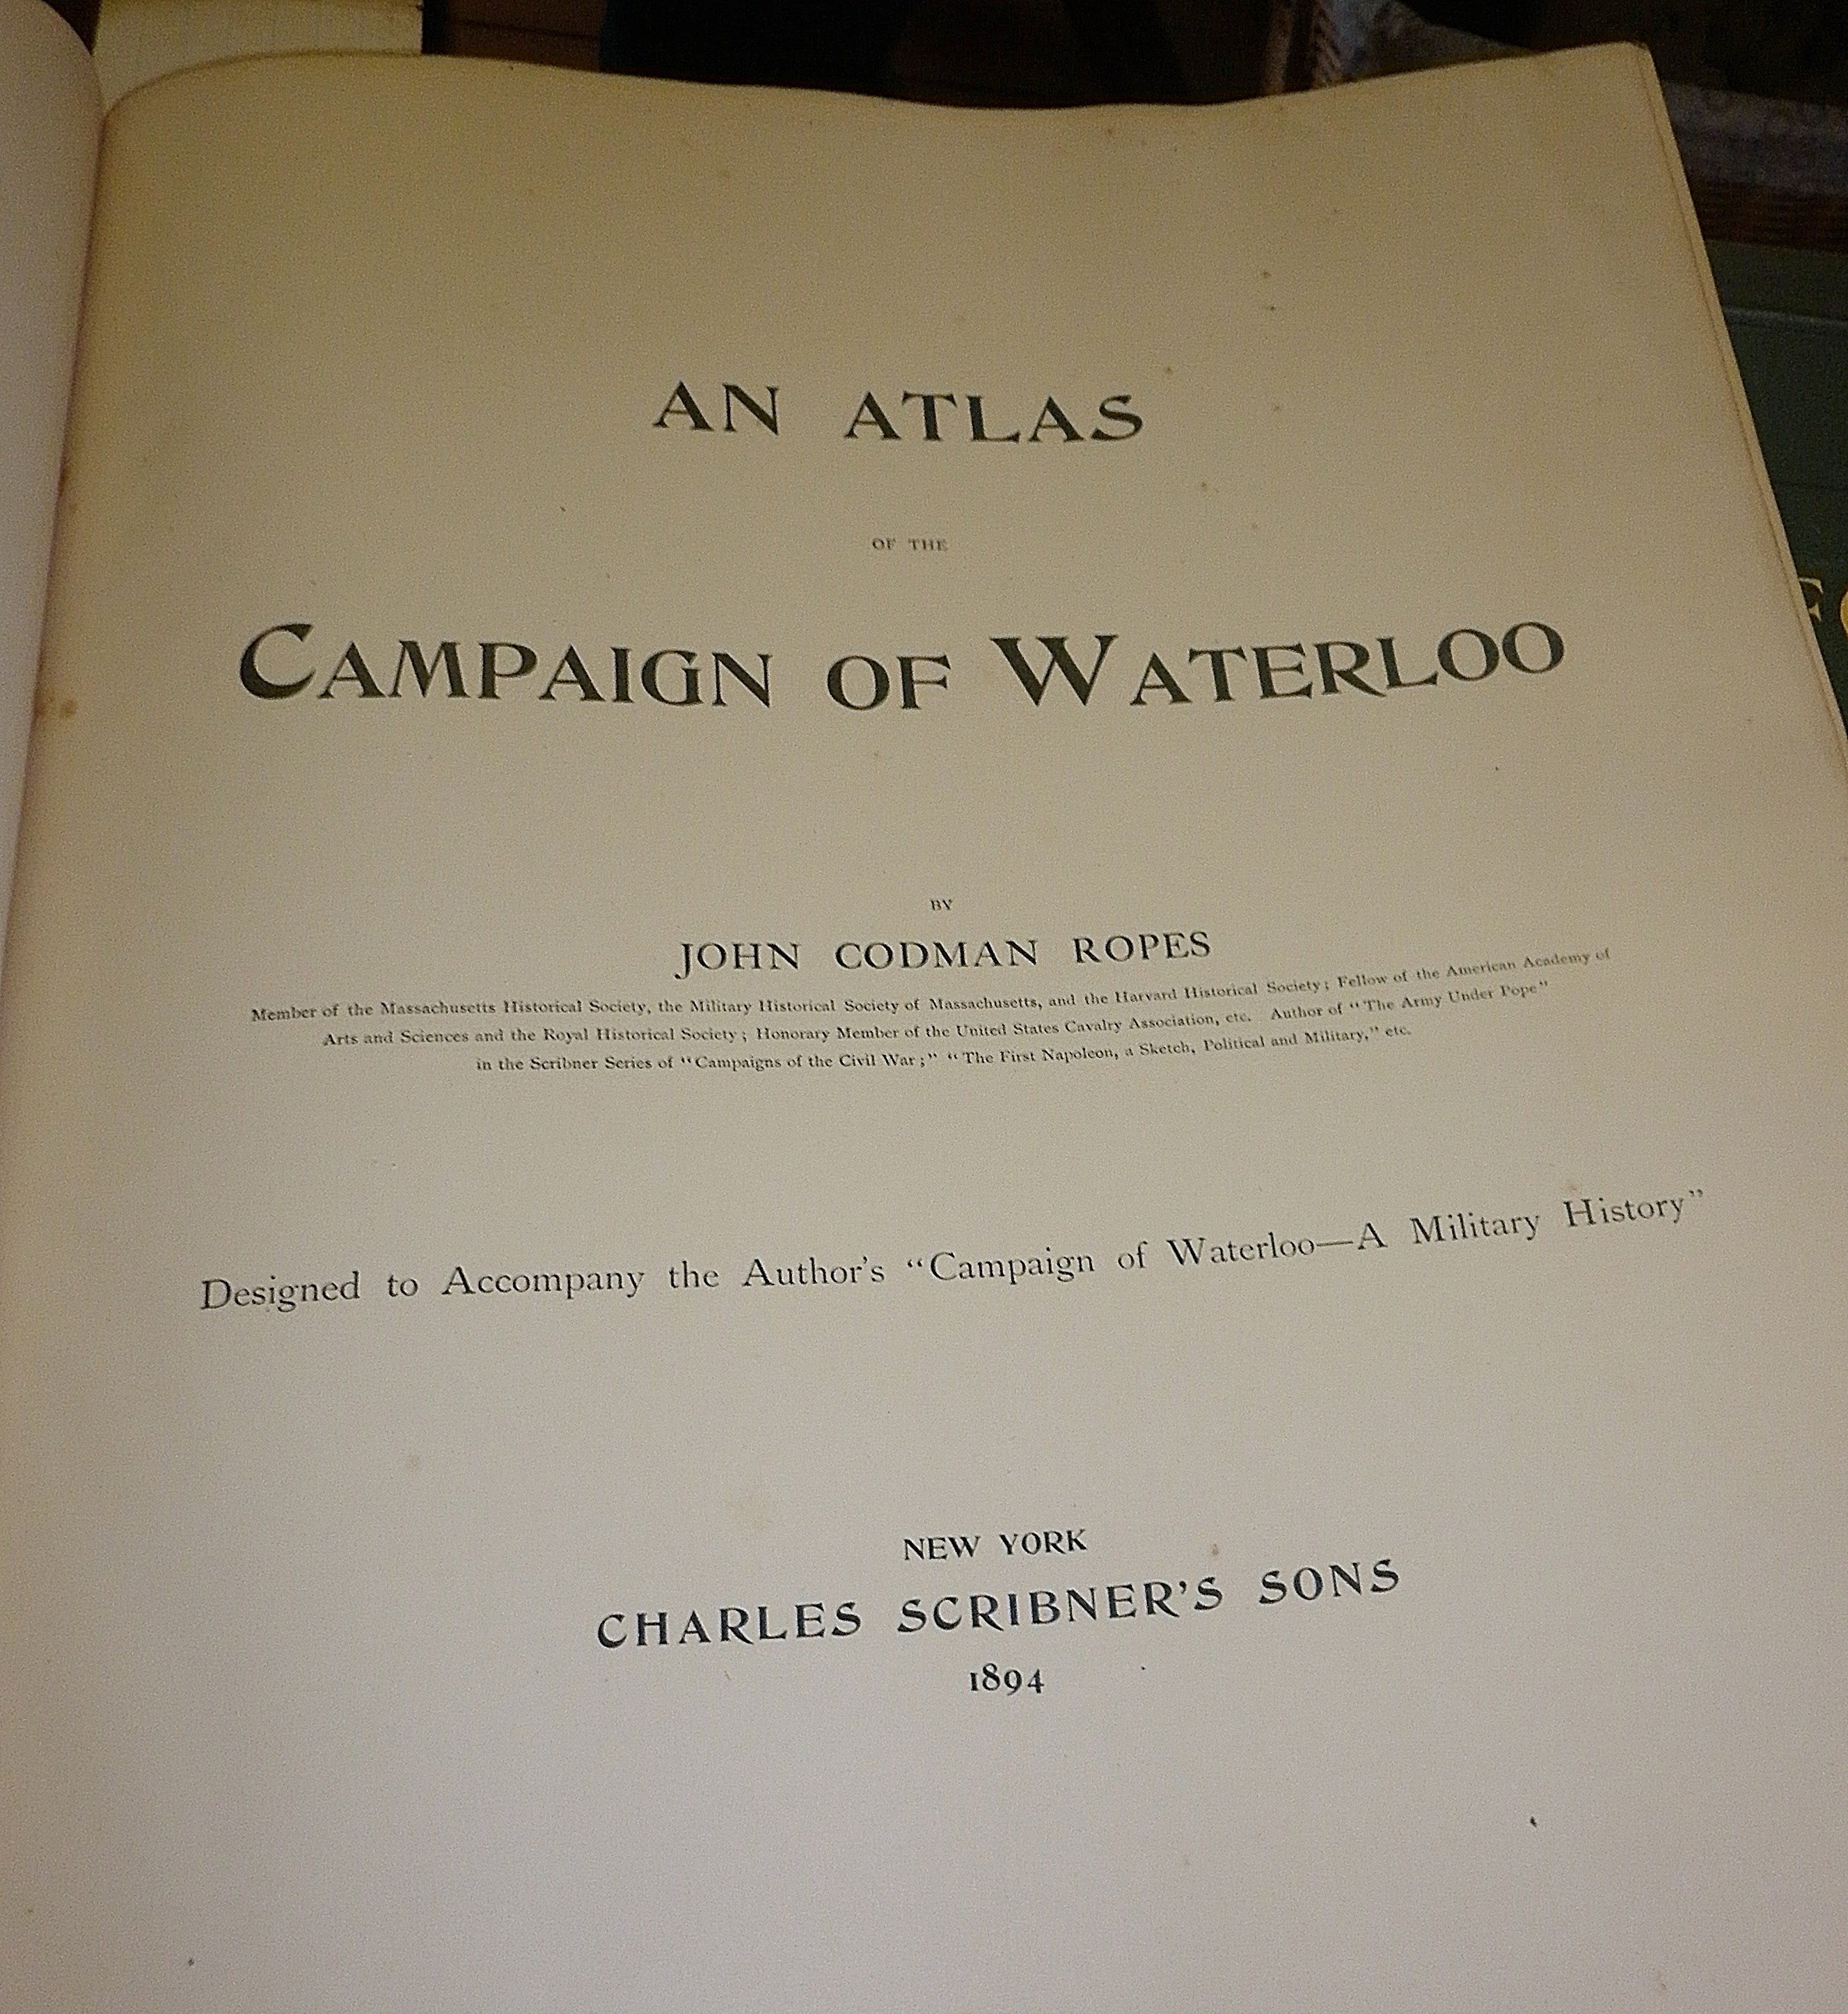 An Atlas of the Campaign of Waterloo by John Codman Ropes, 1894, other atlases and books - Image 2 of 2